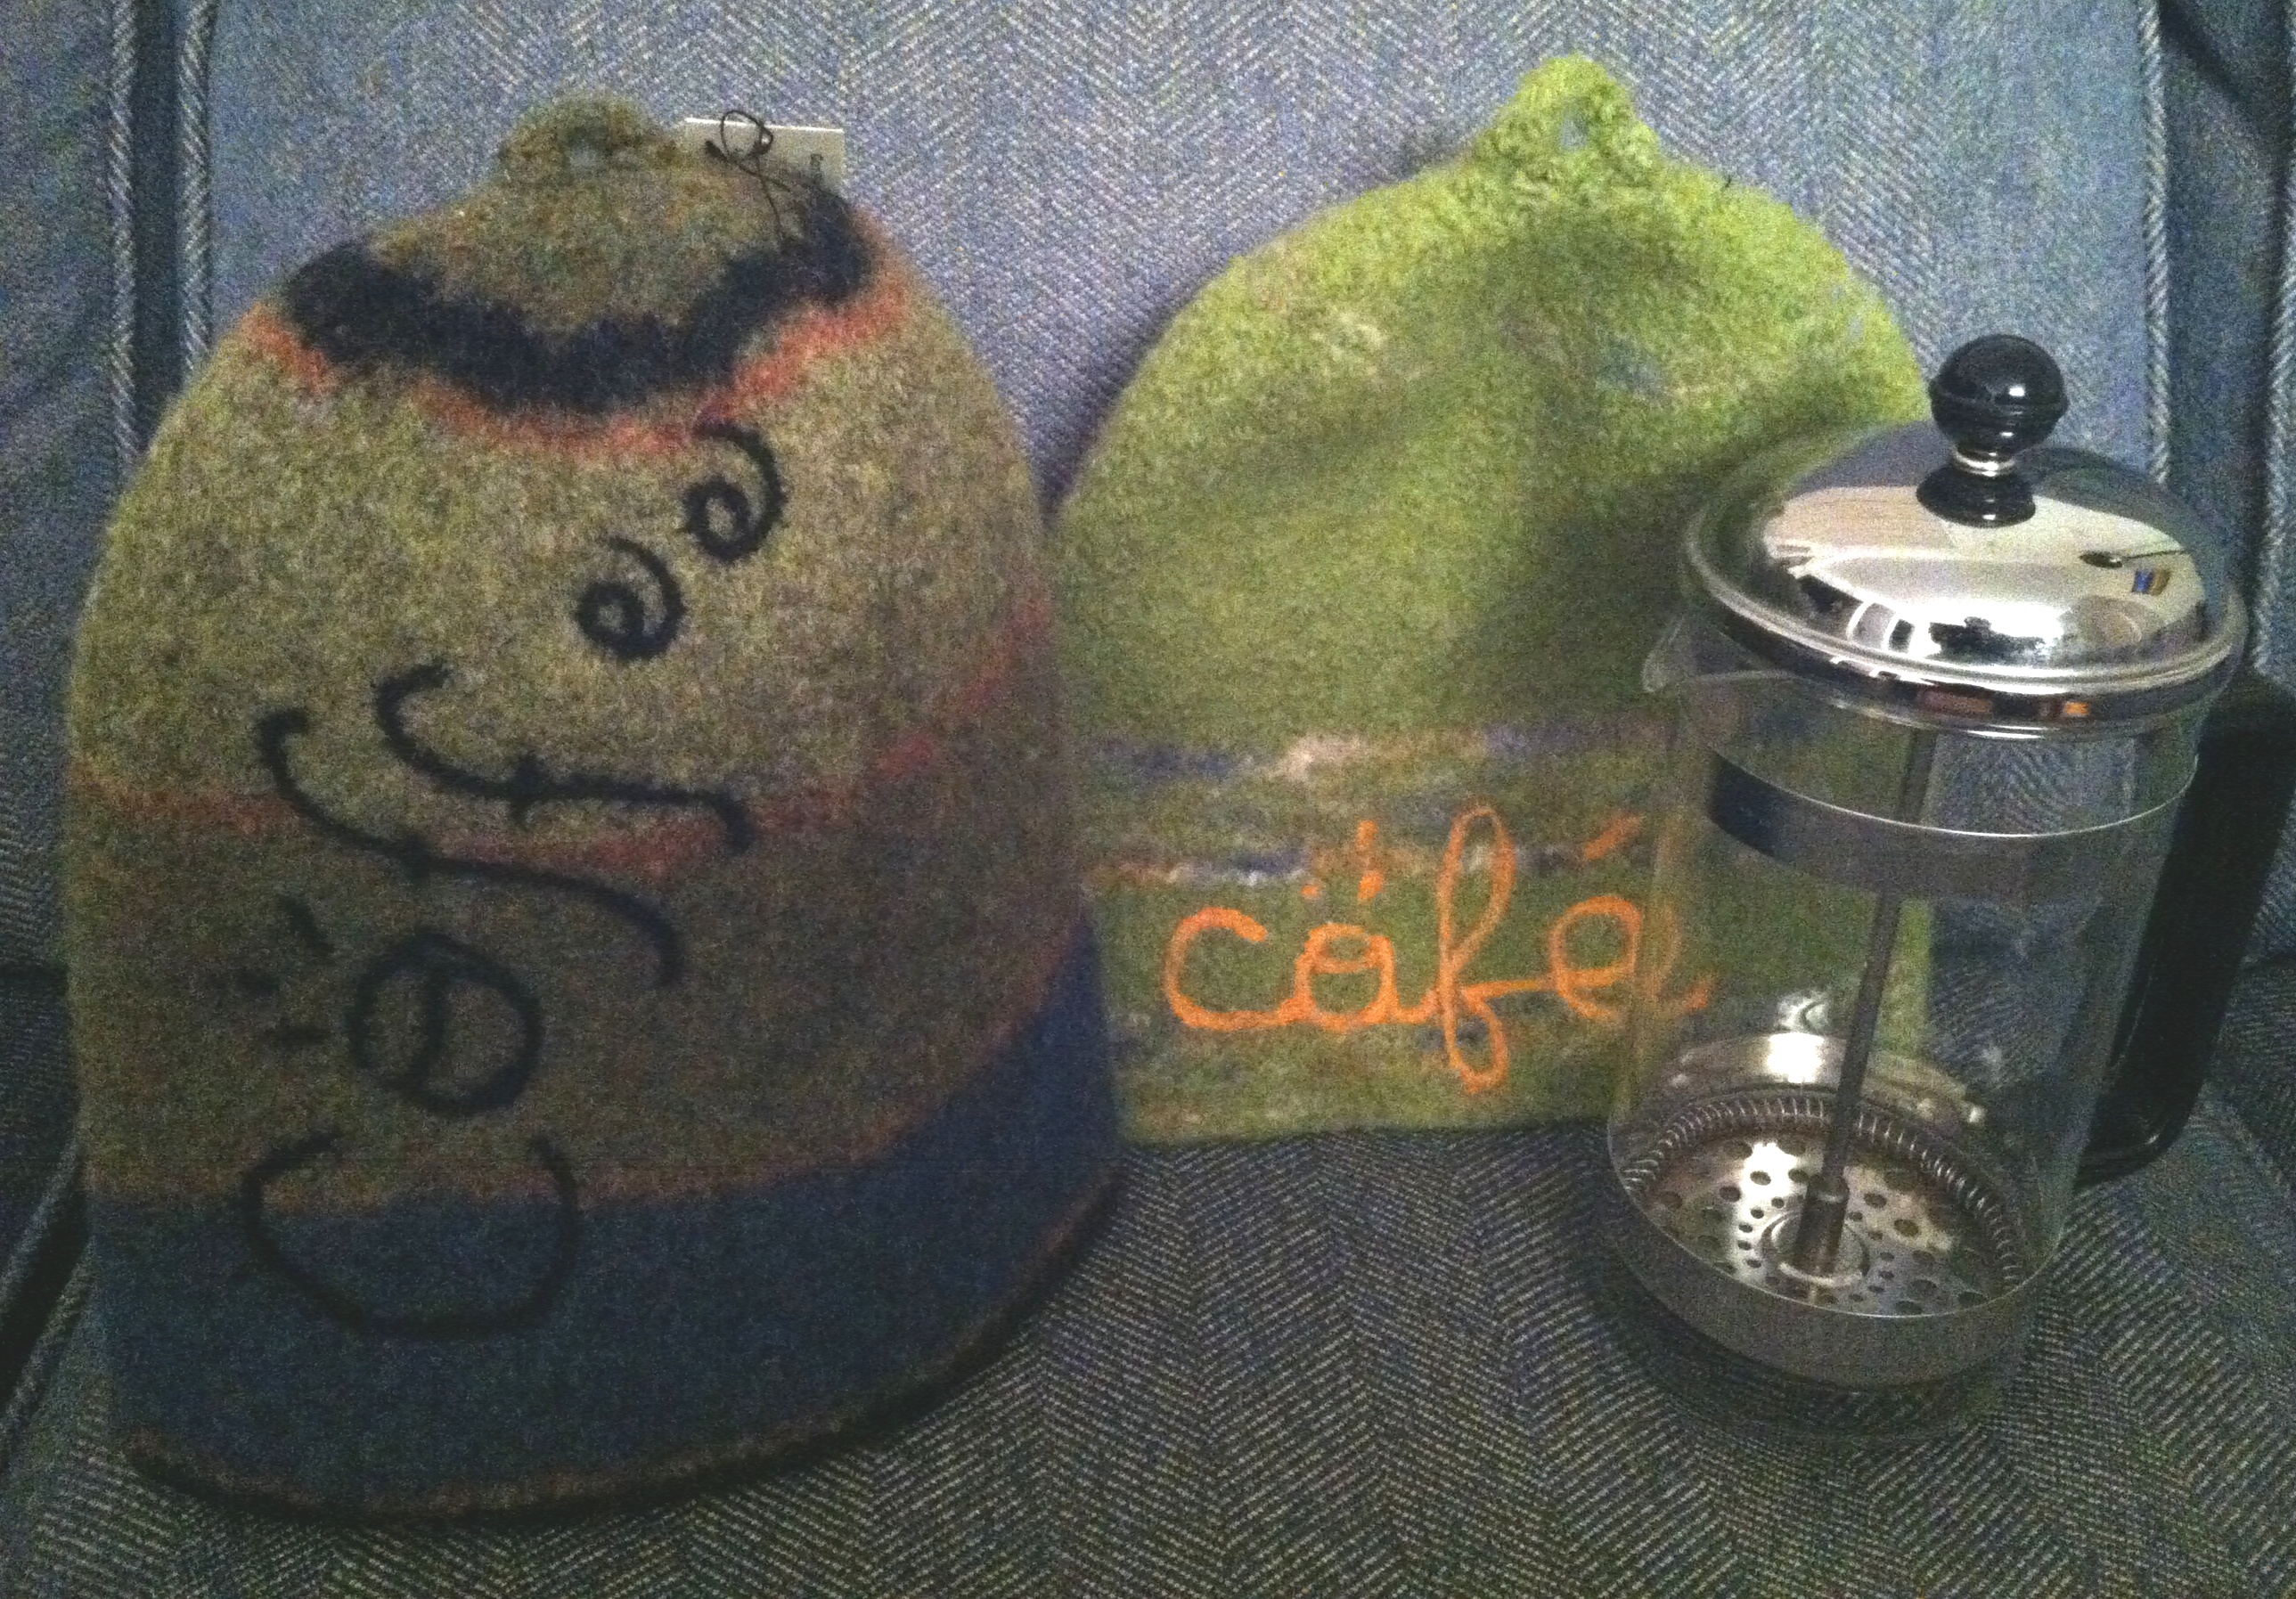 Hats/Cozies for your Cold Press Coffee Pot